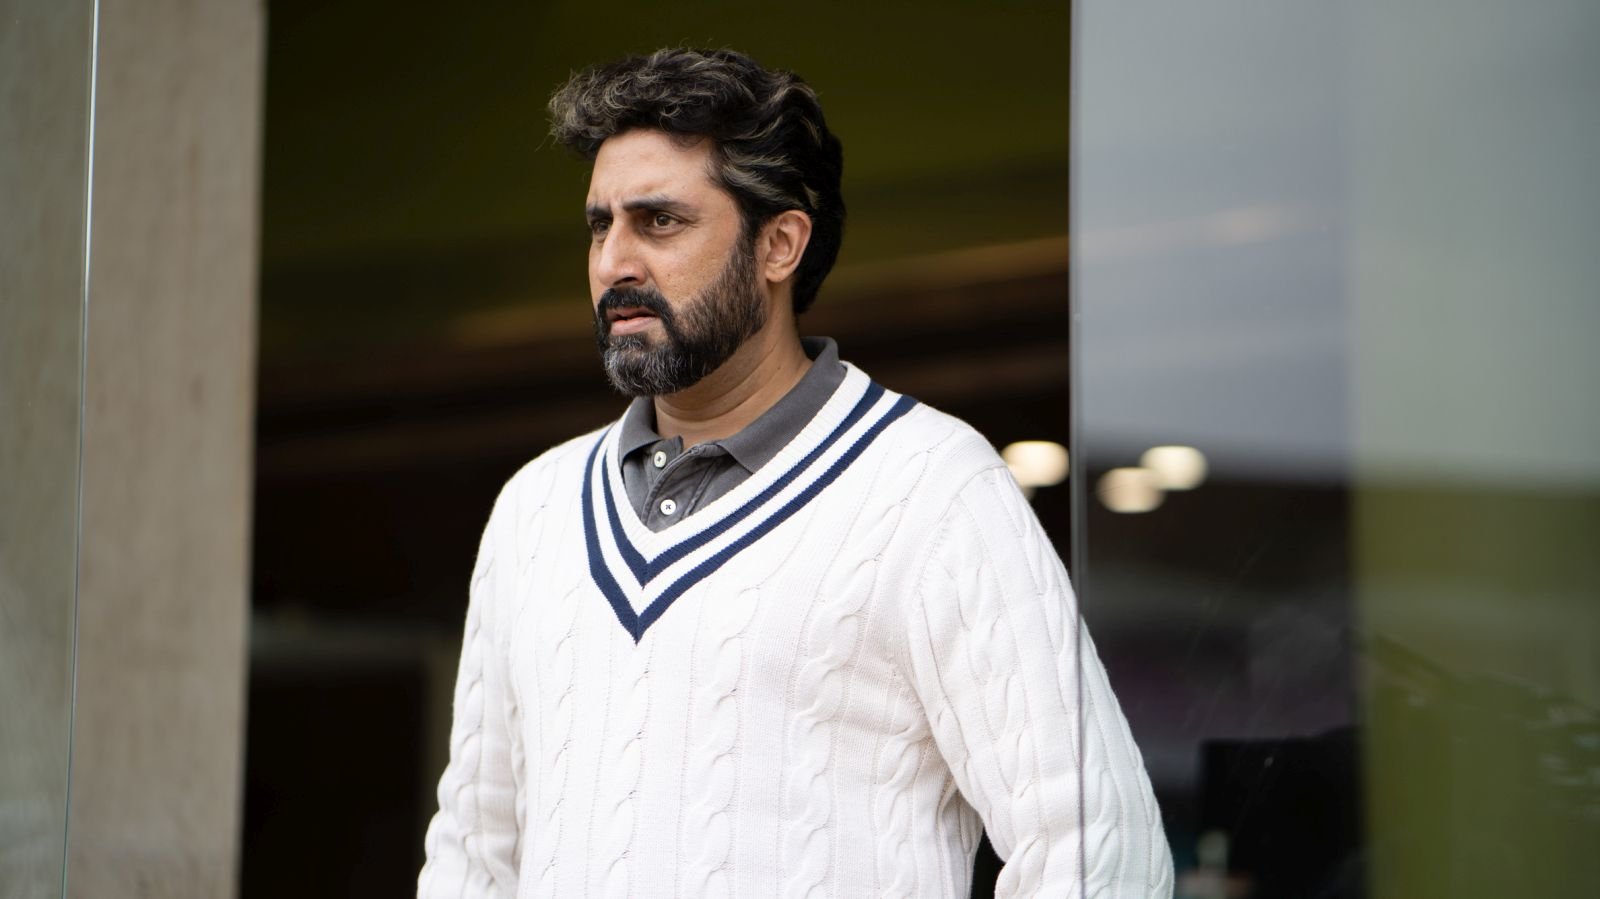 River to River Indian Film Festival 2023: Bollywood stars Abhishek Bachchan and Adil Hussain among the guests